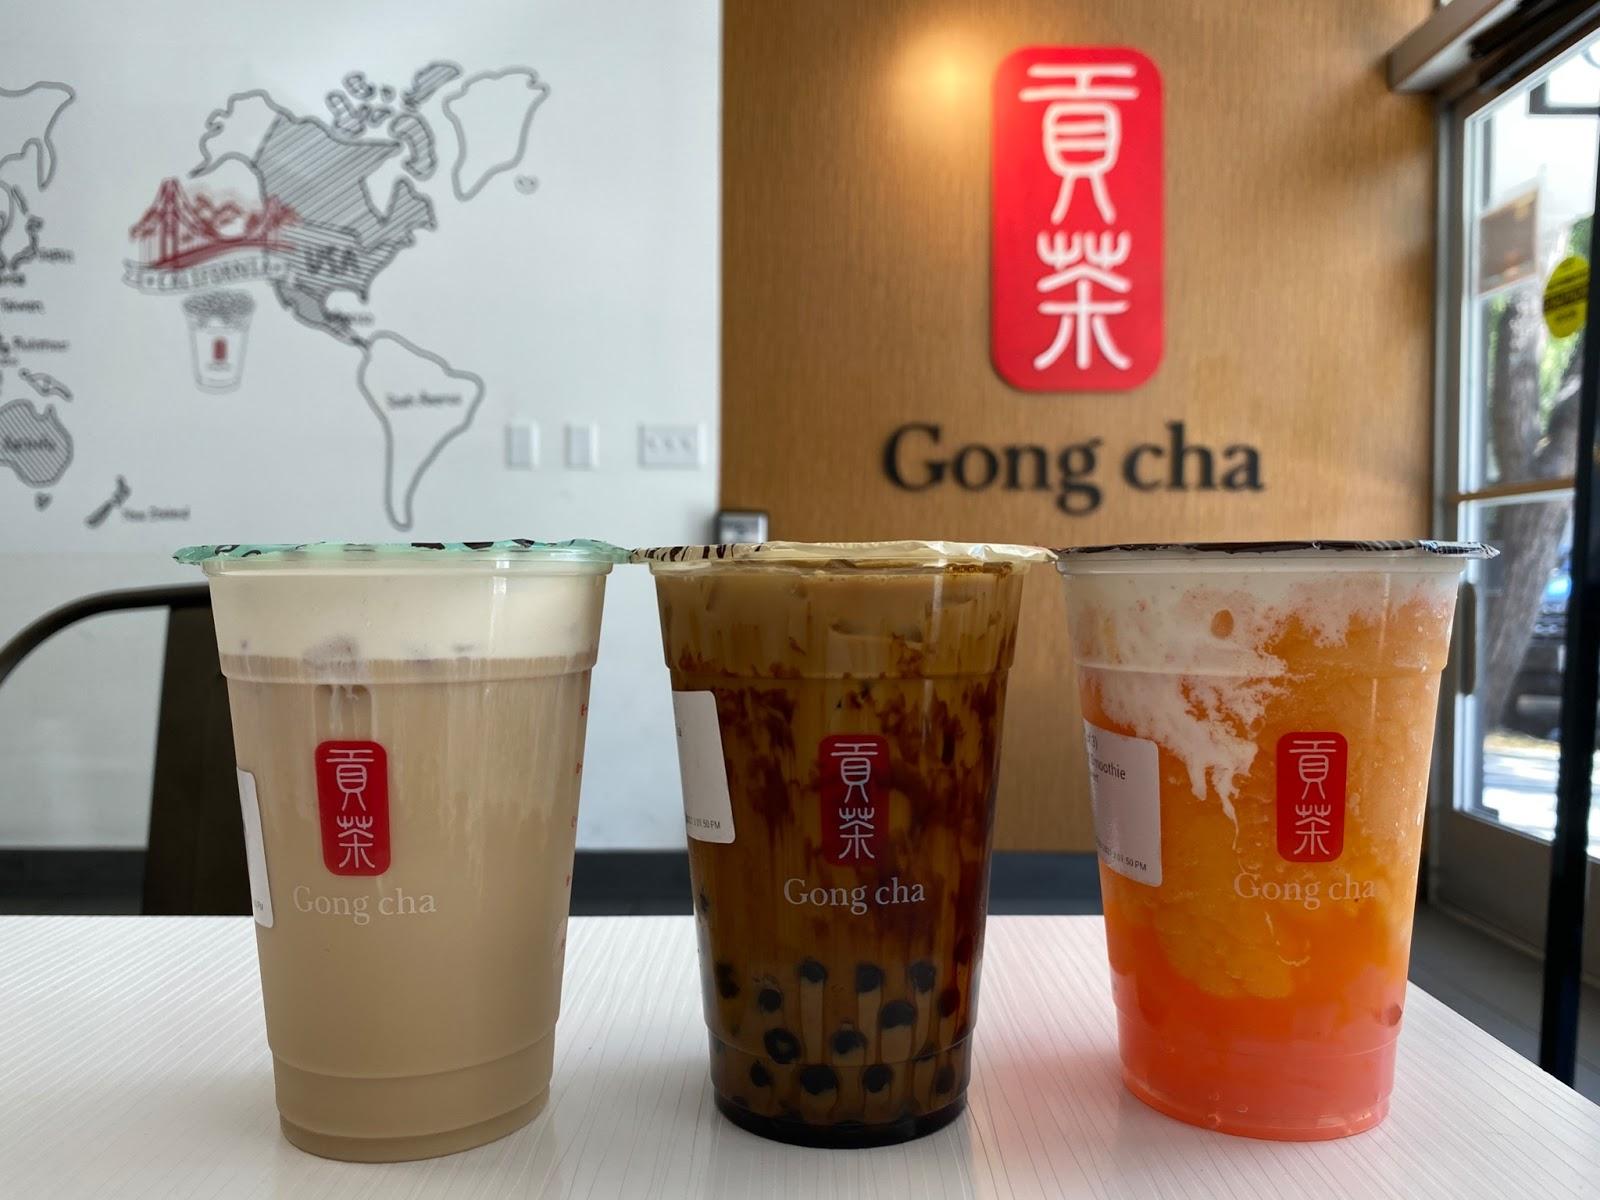 Left: Brown Sugar milk tea with added boba
Right: Star Jelly Grapefruit Smoothie has peach-flavored, star-shaped jelly and is topped with milk foam.